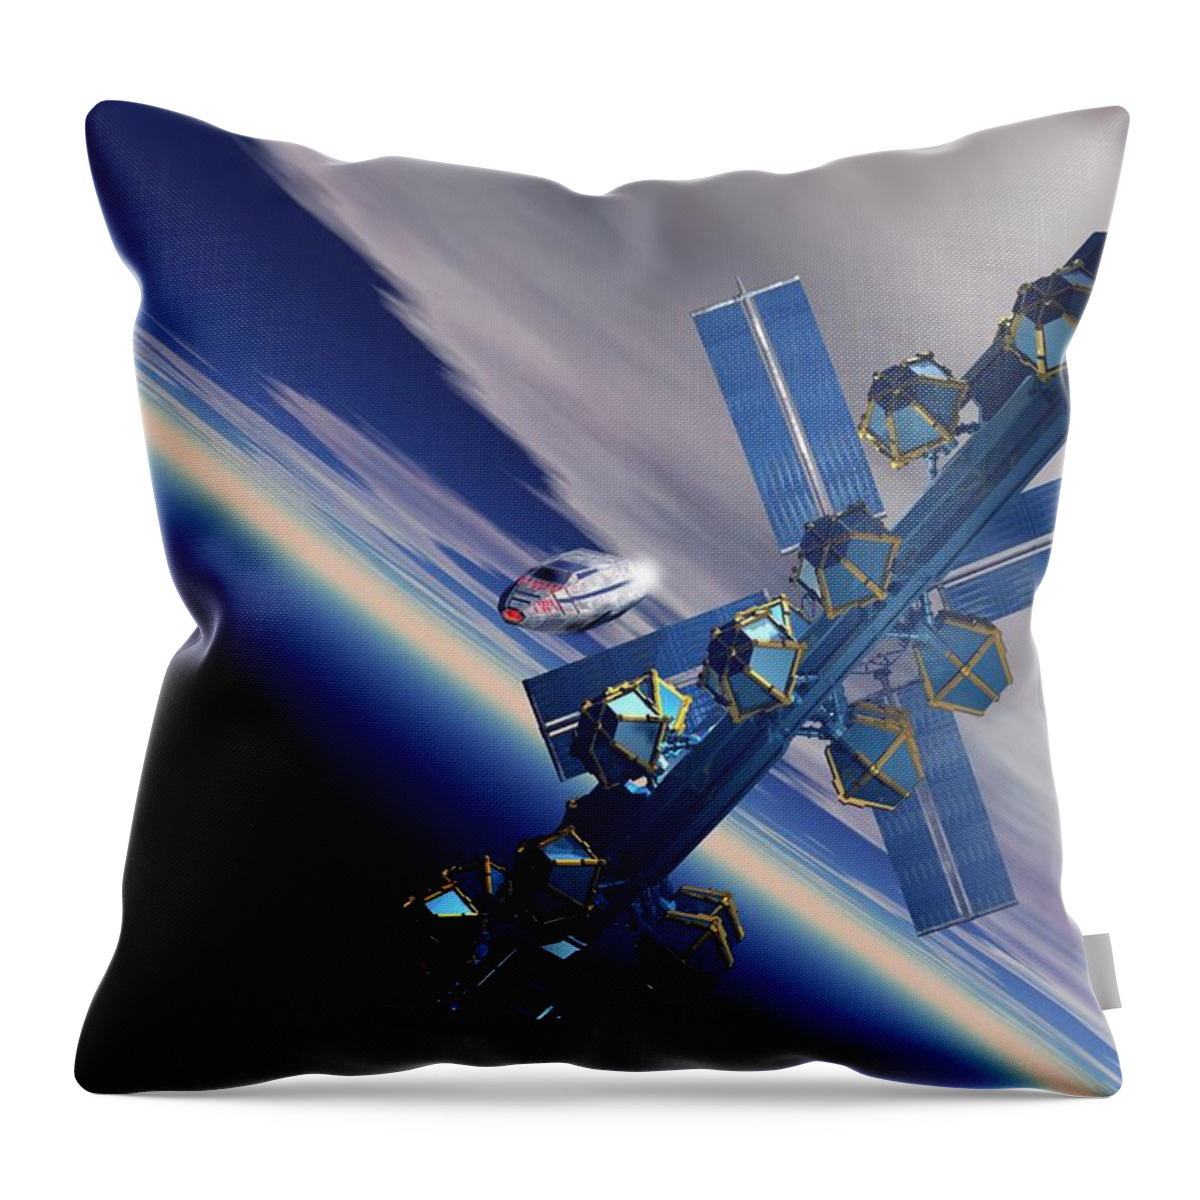 Built Structure Throw Pillow featuring the digital art Space Station, Artwork #6 by Victor Habbick Visions